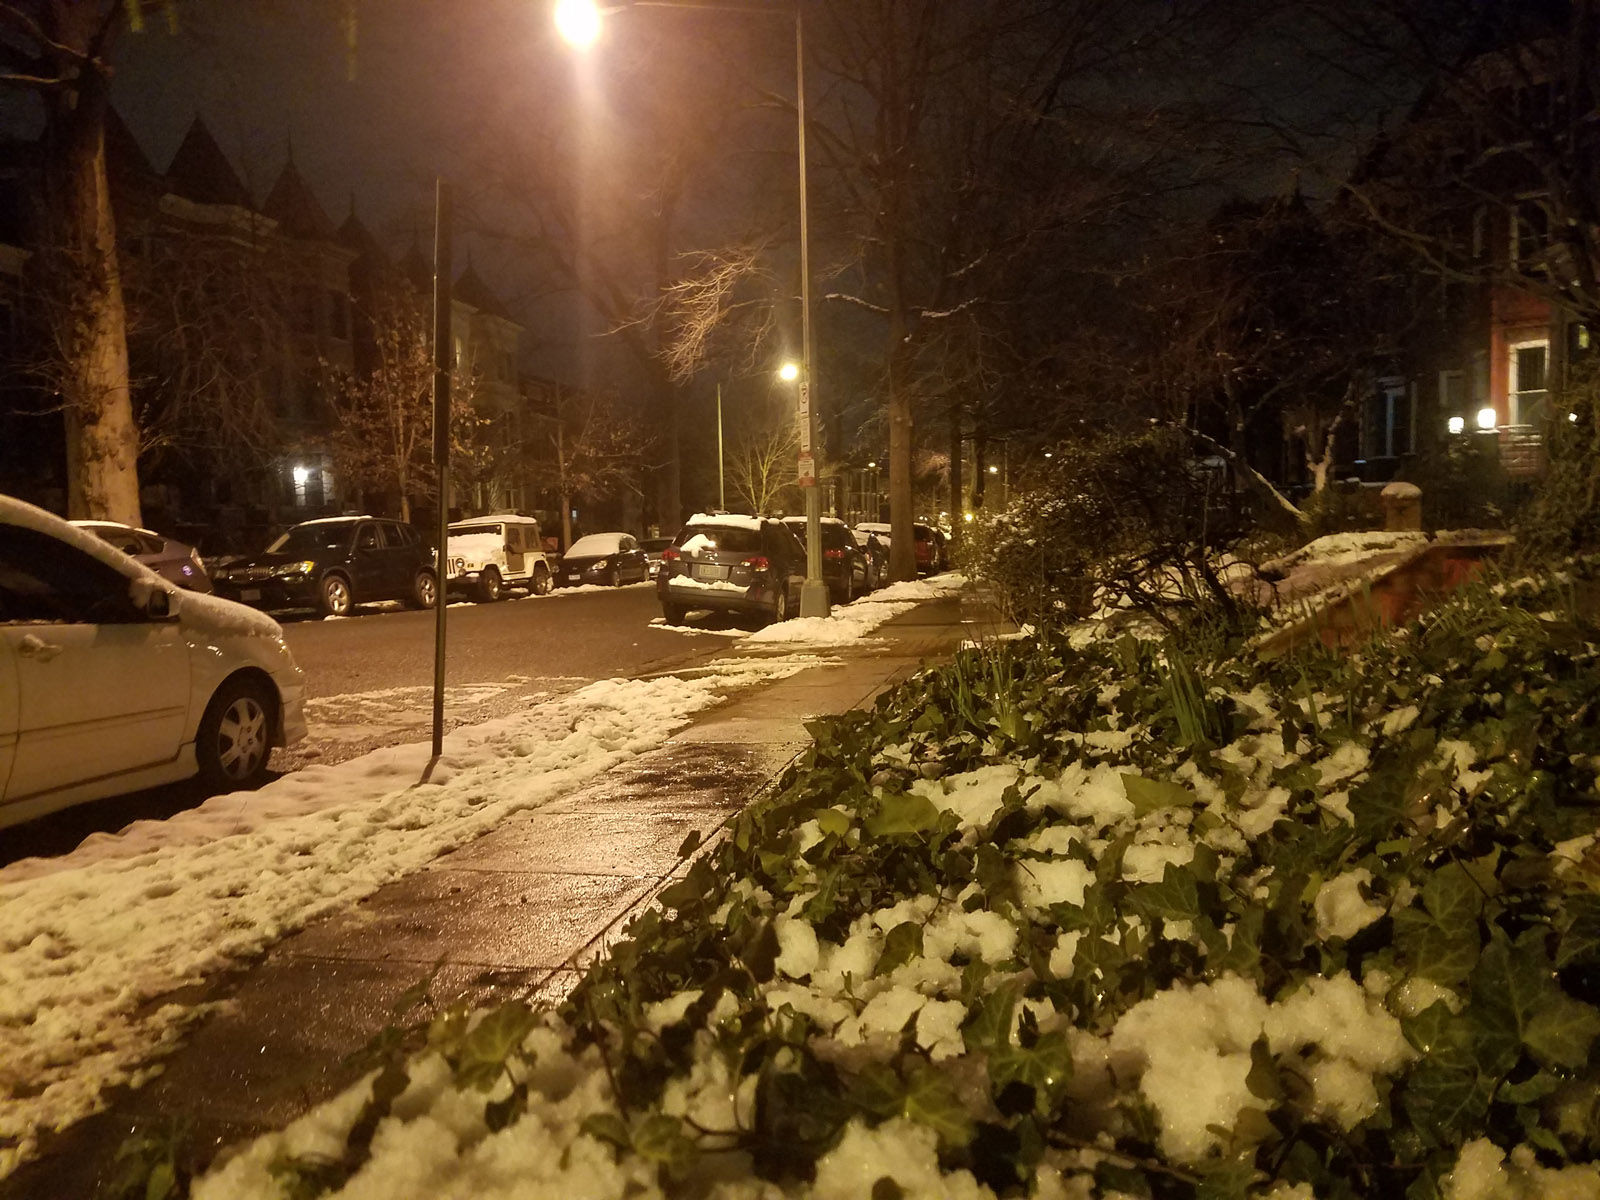 Lamont Street in Columbia Heights in D.C. a little before 5 a.m. on Thursday. While some roads are wet, the fact temperatures stayed above freezing in most areas should help with the Thursday morning commute. (WTOP/Will Vitka)